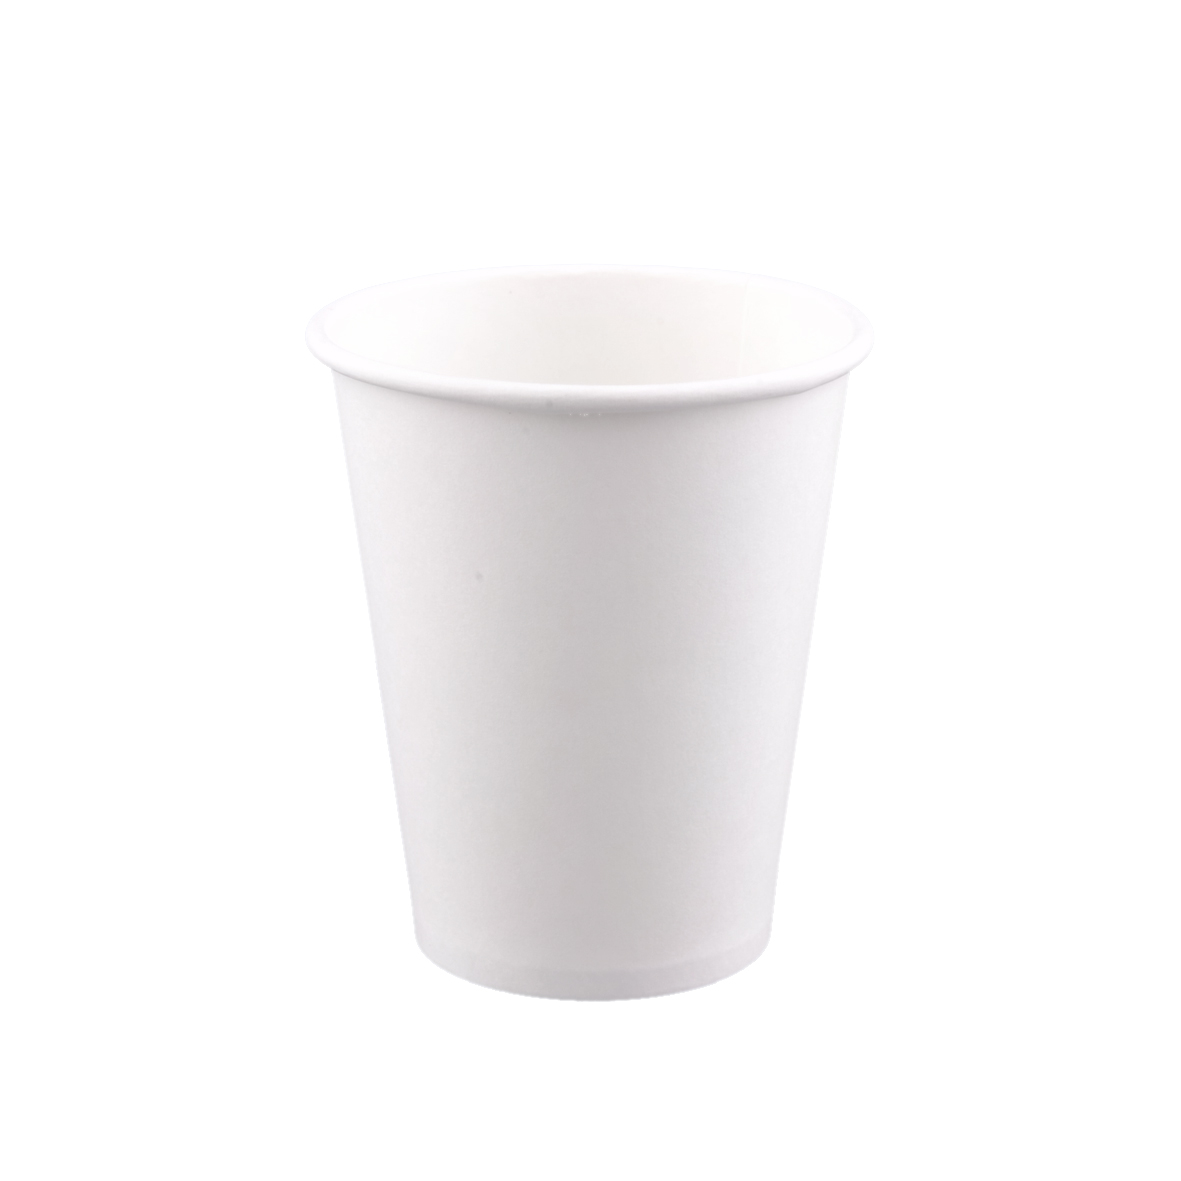 Hot Paper Cup White, 8 oz.